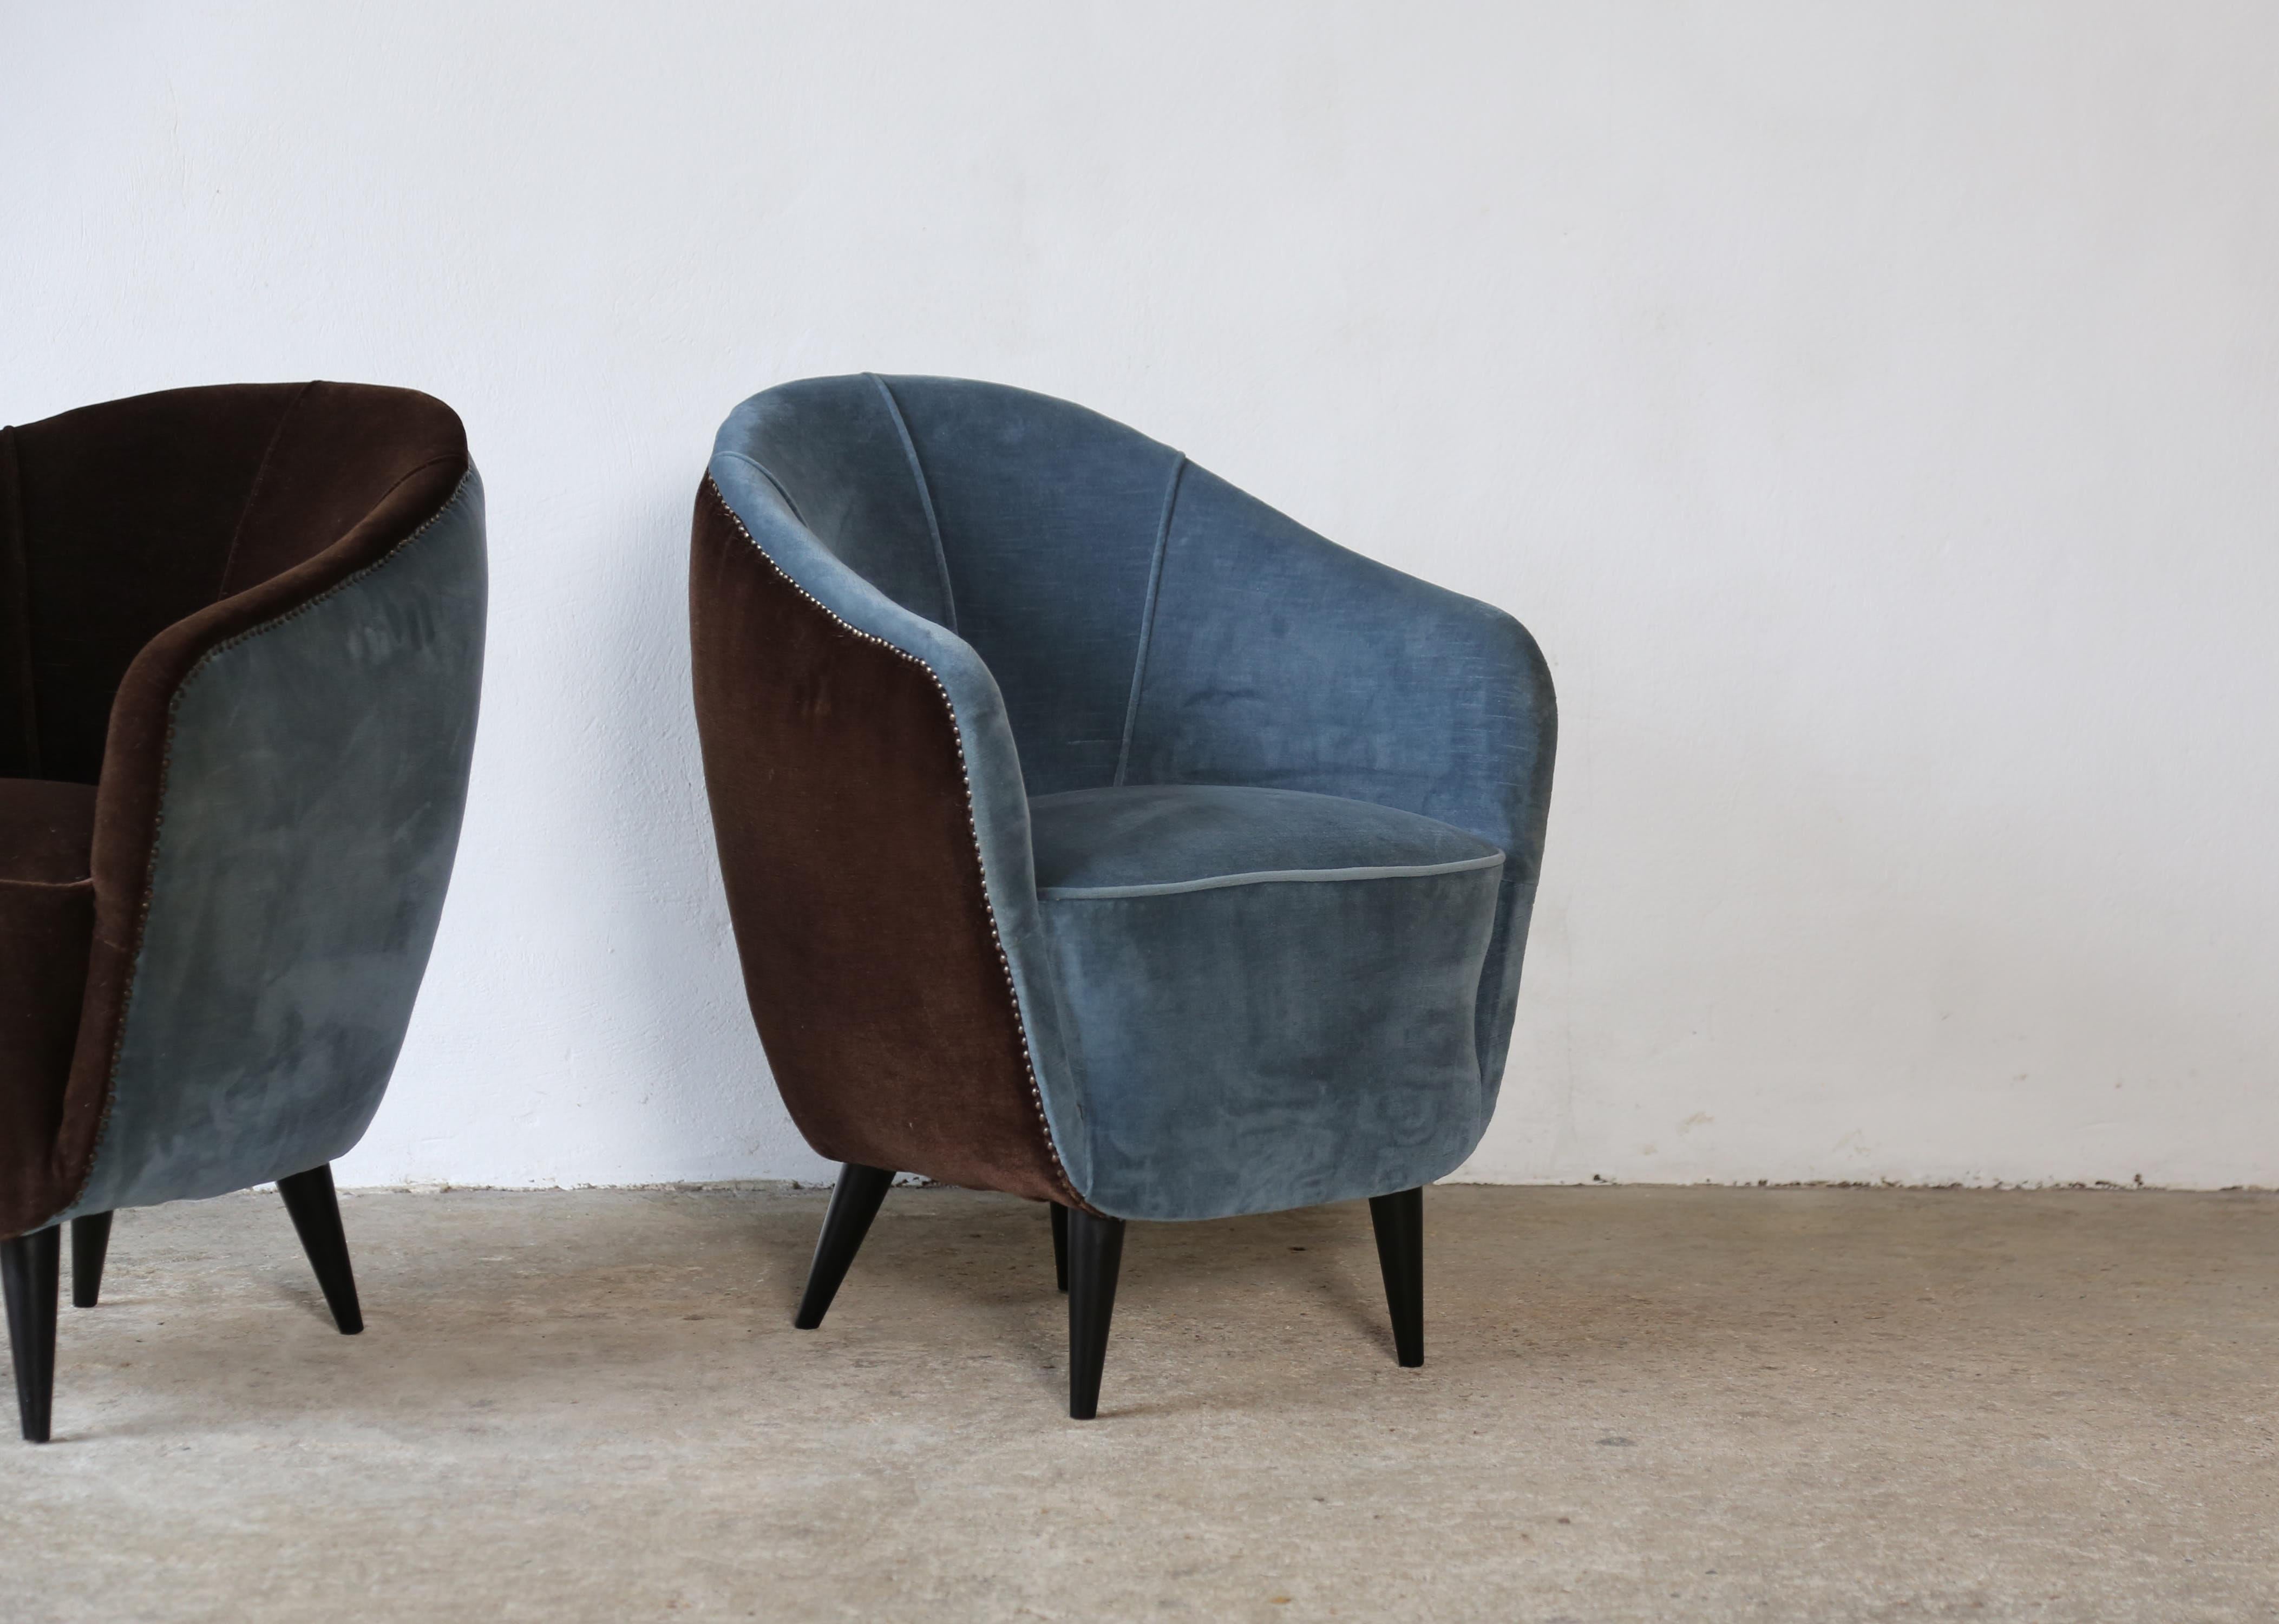 Fabric Pair of Gio Ponti Style Chairs, Italy, 1960s For Sale